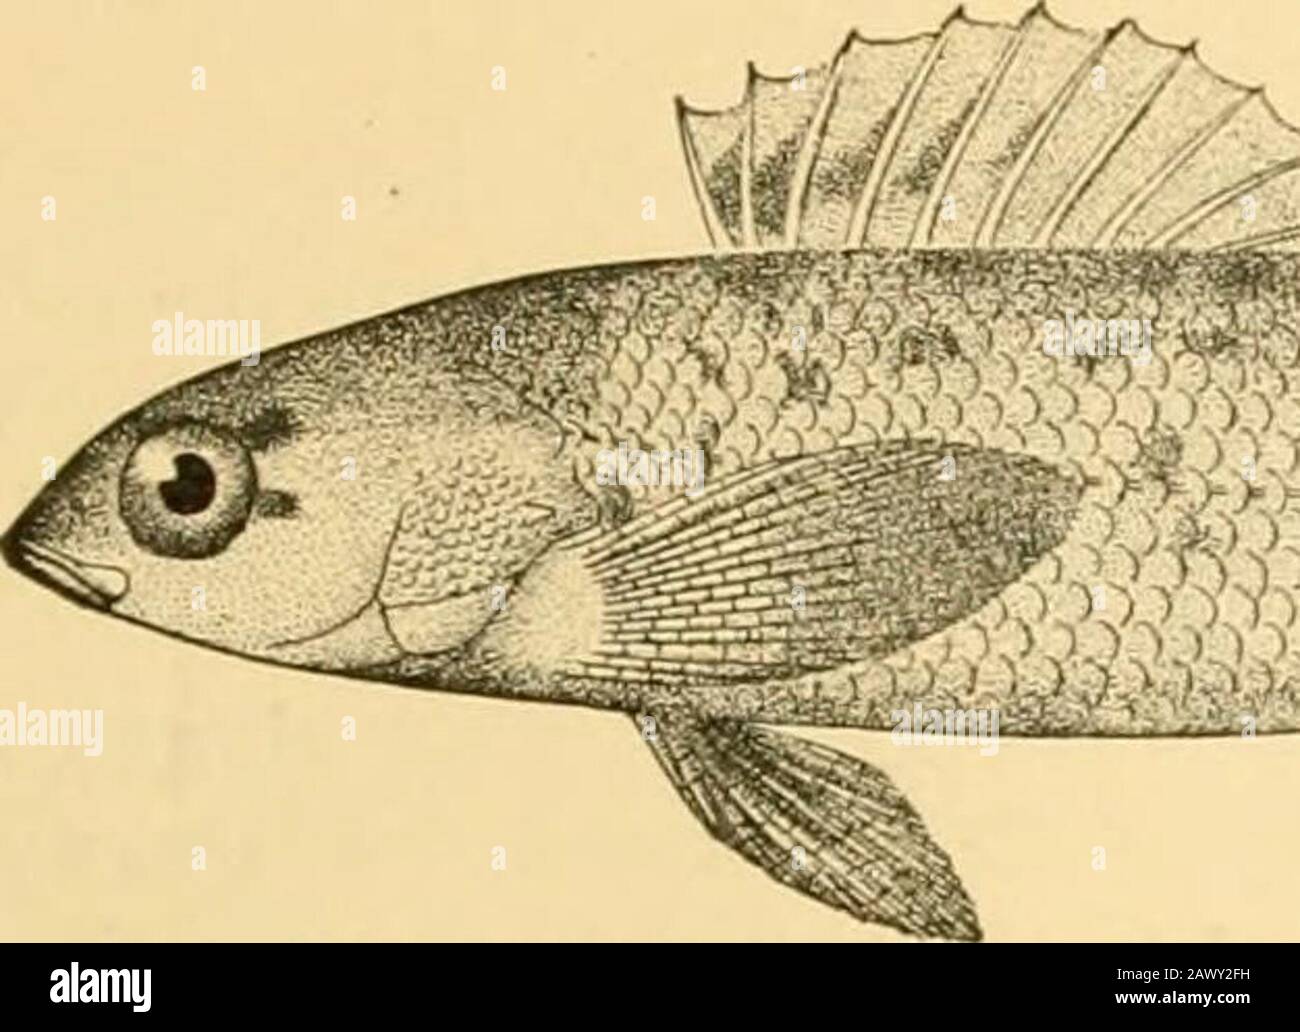 Fishes . Fia. 418—Sand-darter, Ammocrypta clara (Jordan & Meek). Des Moines River. method of protection, and in the related Ammocrypta bcani ofthe streams of the Louisiana pine-woods, the body is almostnaked, as also in loa vitrea, the glassy darter of the pine-woodsof North Carolina. In the other darters the body is more compressed, the move-ments less activ^e, the coloration even more brilliant in themales, which are far more showy than their dull olivaceousmates. To Etheostoma nearly half of the species belong, and they Percoidea, or Perch-like Fishes 529 lorm indeed a royal series of littl Stock Photo